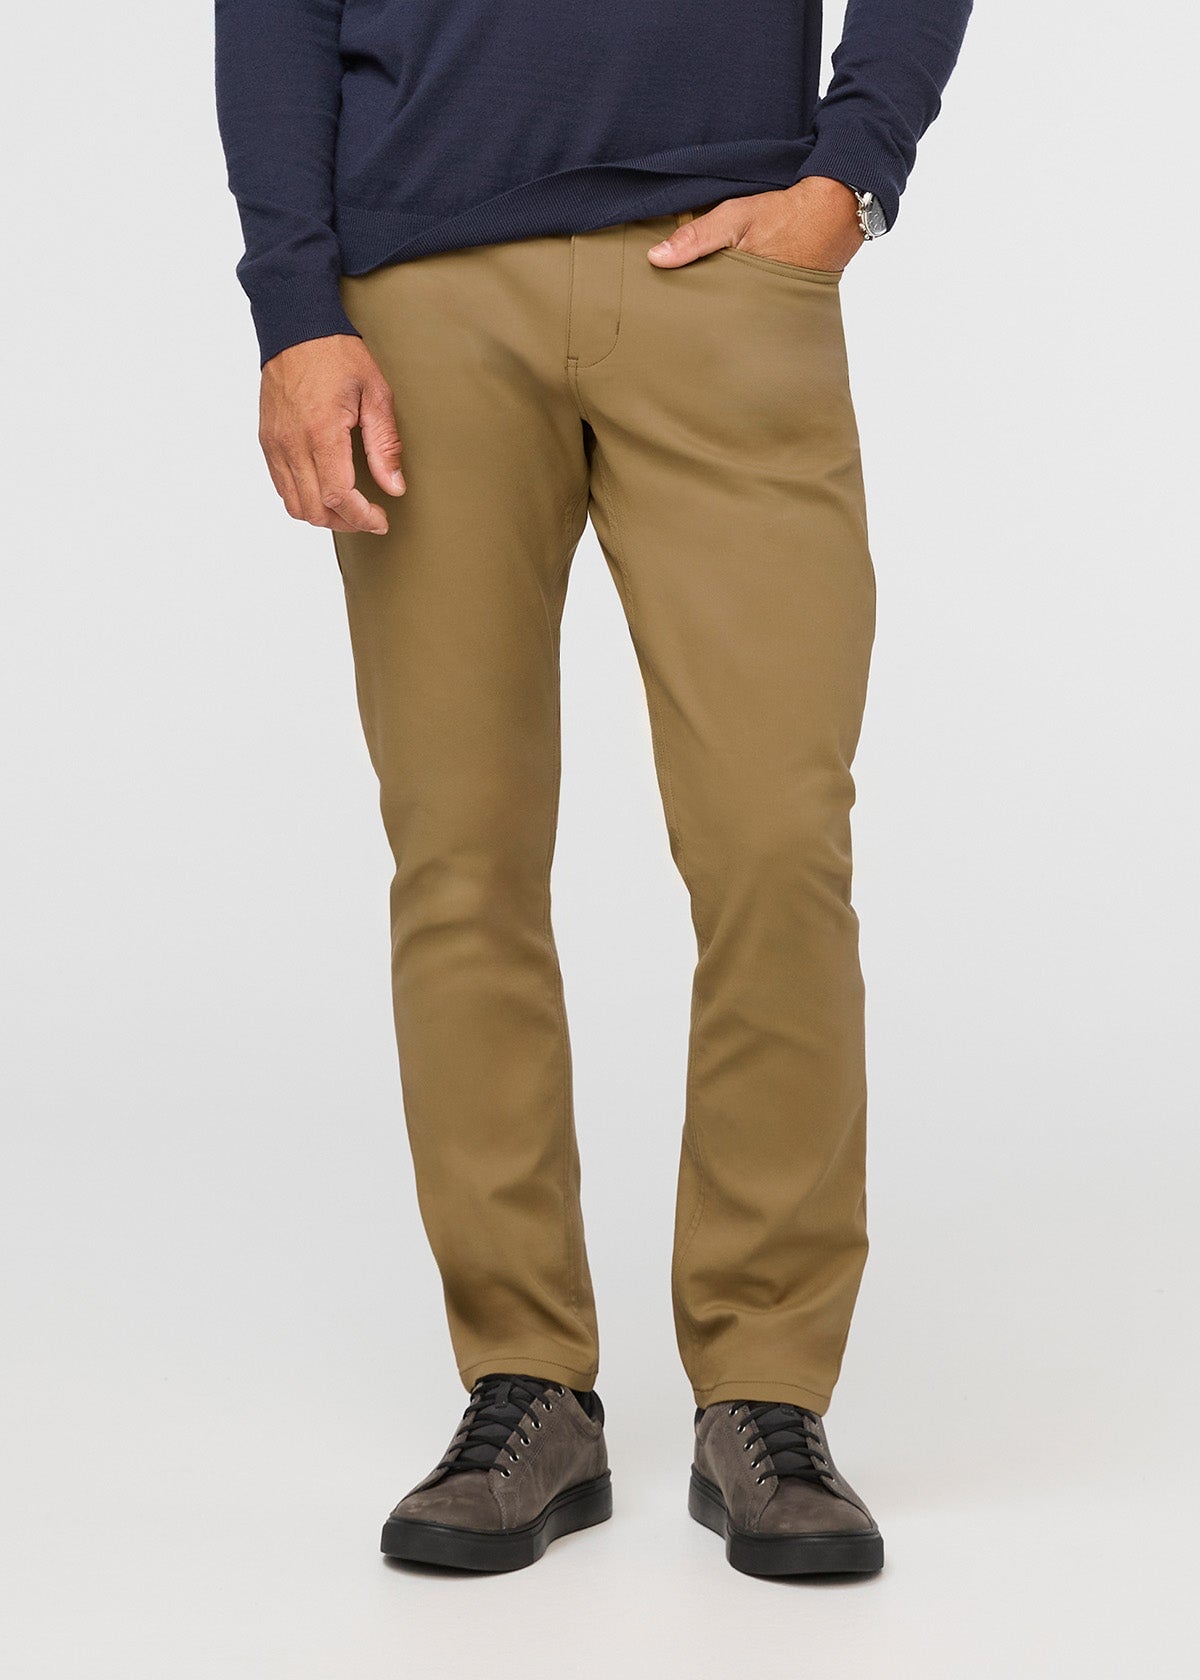 mens khaki relaxed fit stretch pant front